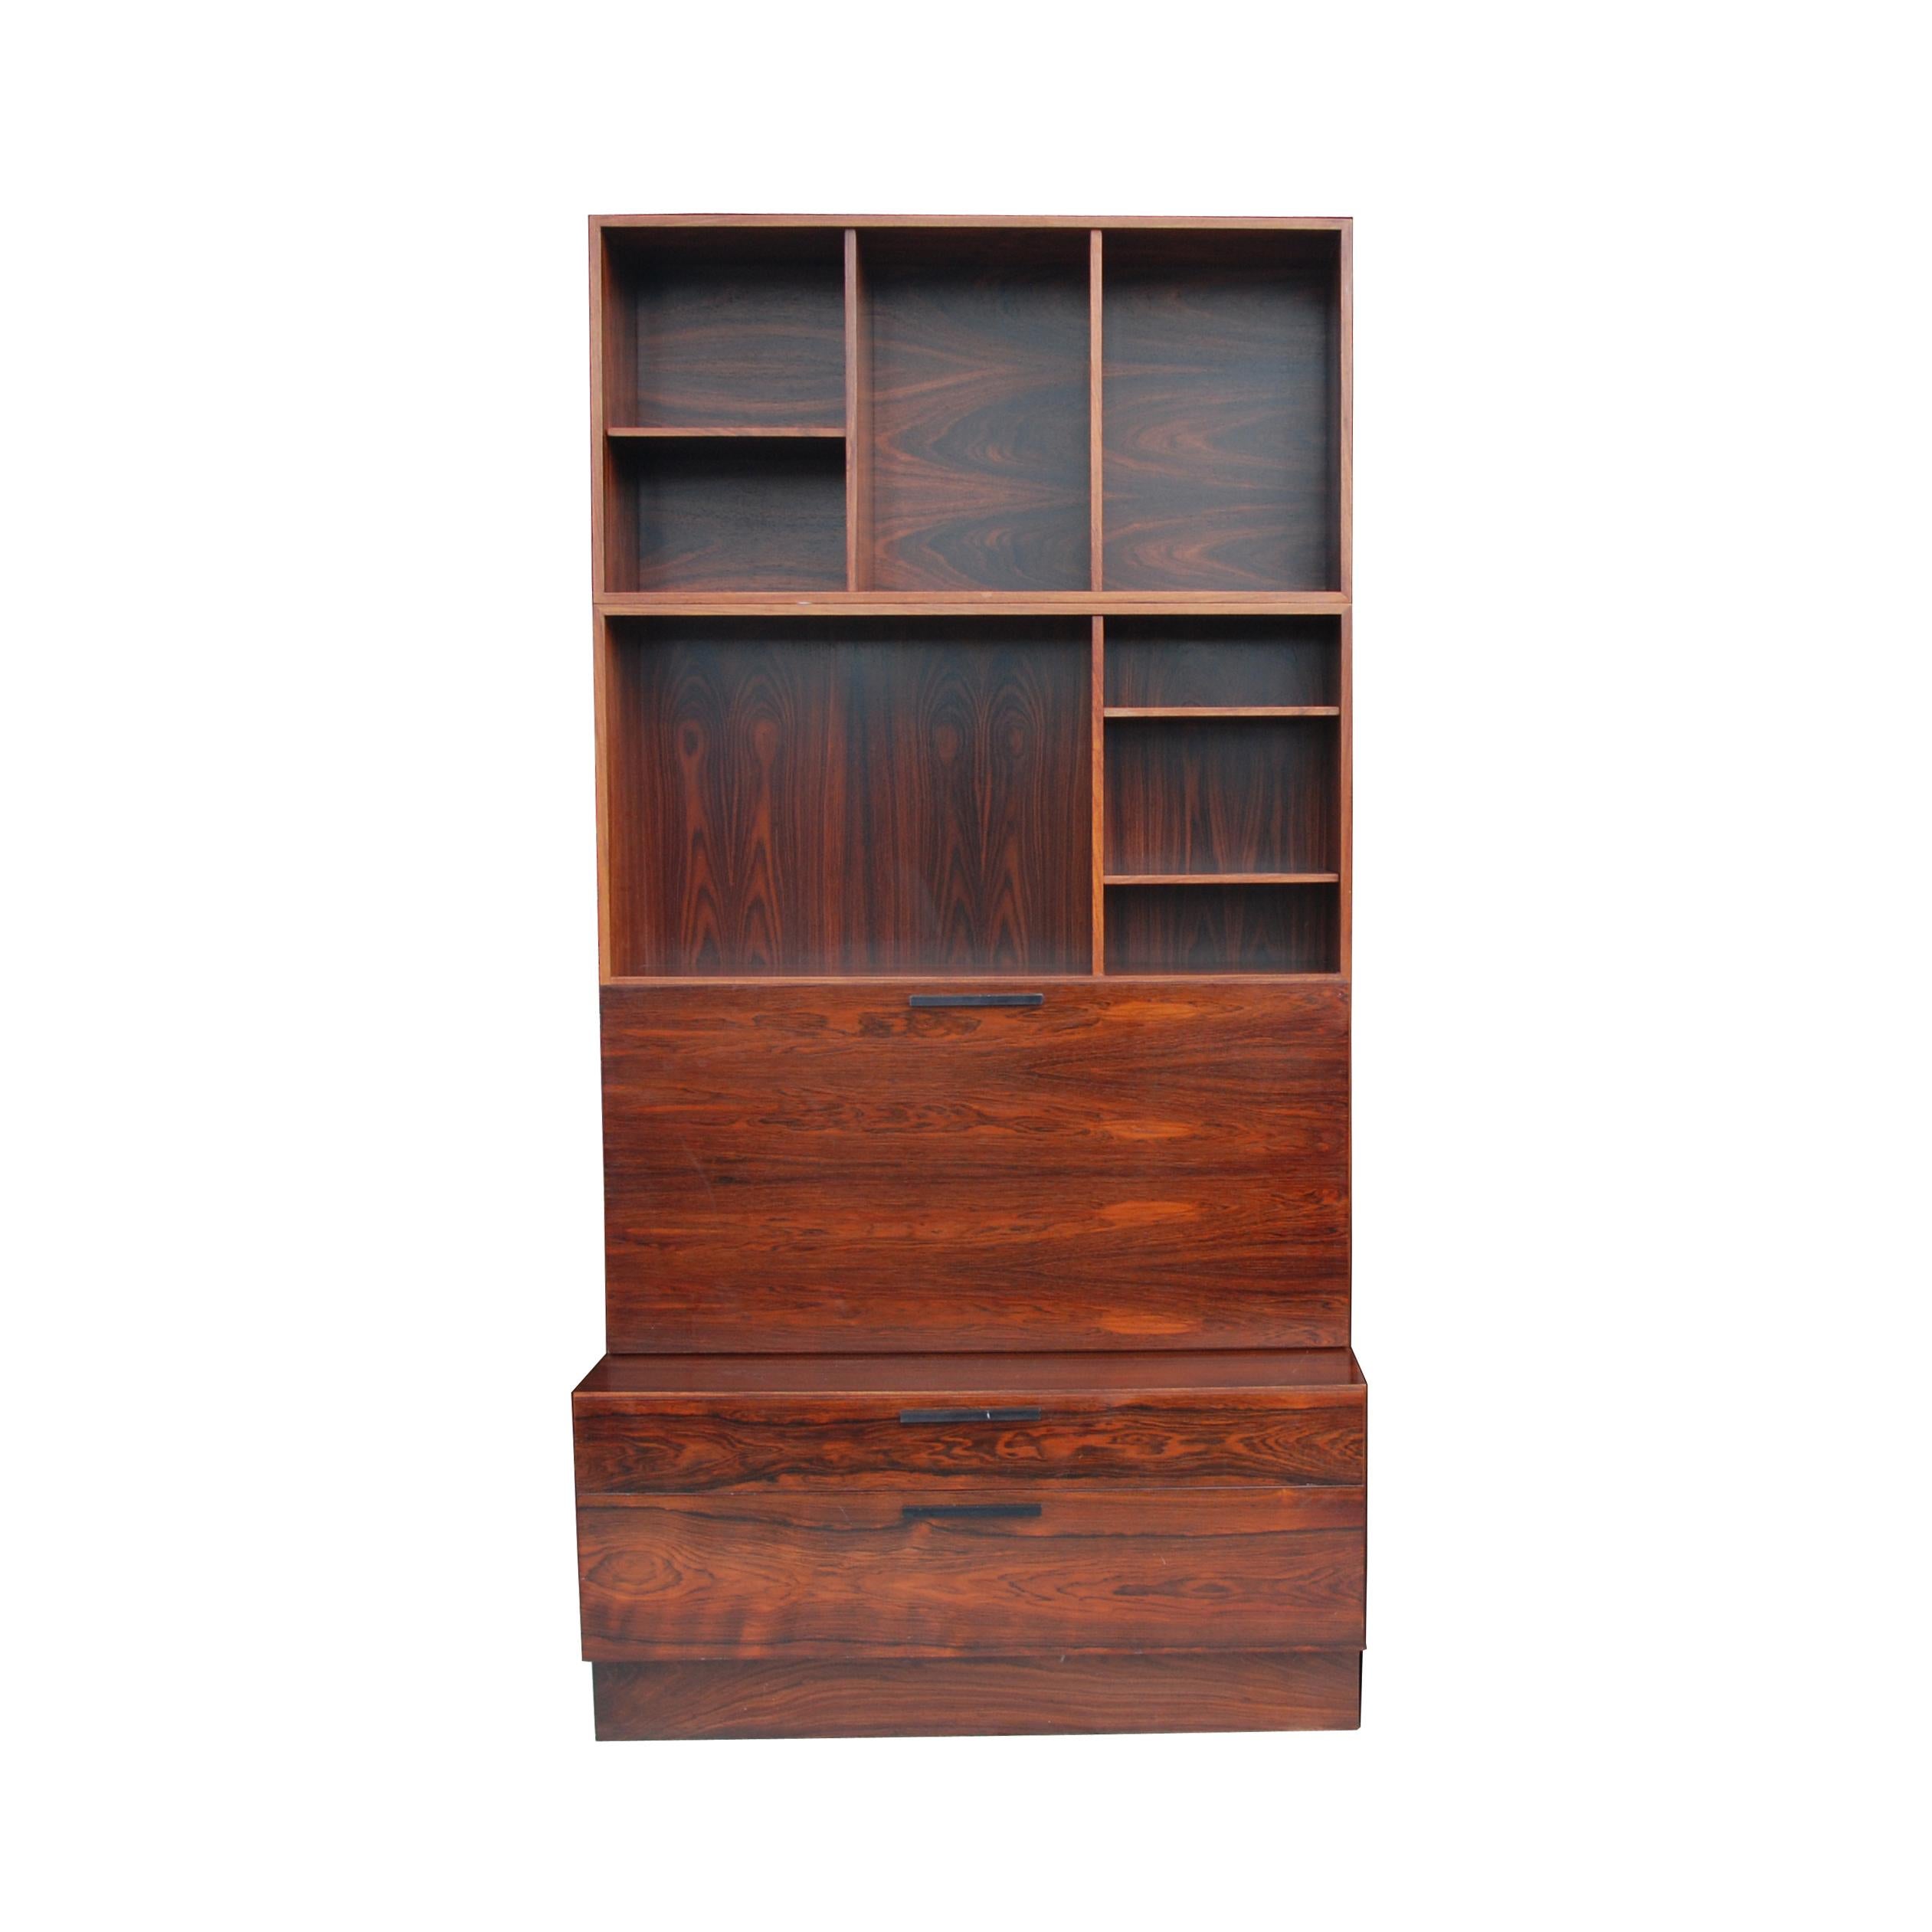 Rosewood bookcase by Ib Kofod-Larsen for Faarup Møbelfabrik,
1960s

Richly grained rosewood in different configurations of open and closed storage with ample drawer space.

2 cabinets can be configured as one wide piece (90.5